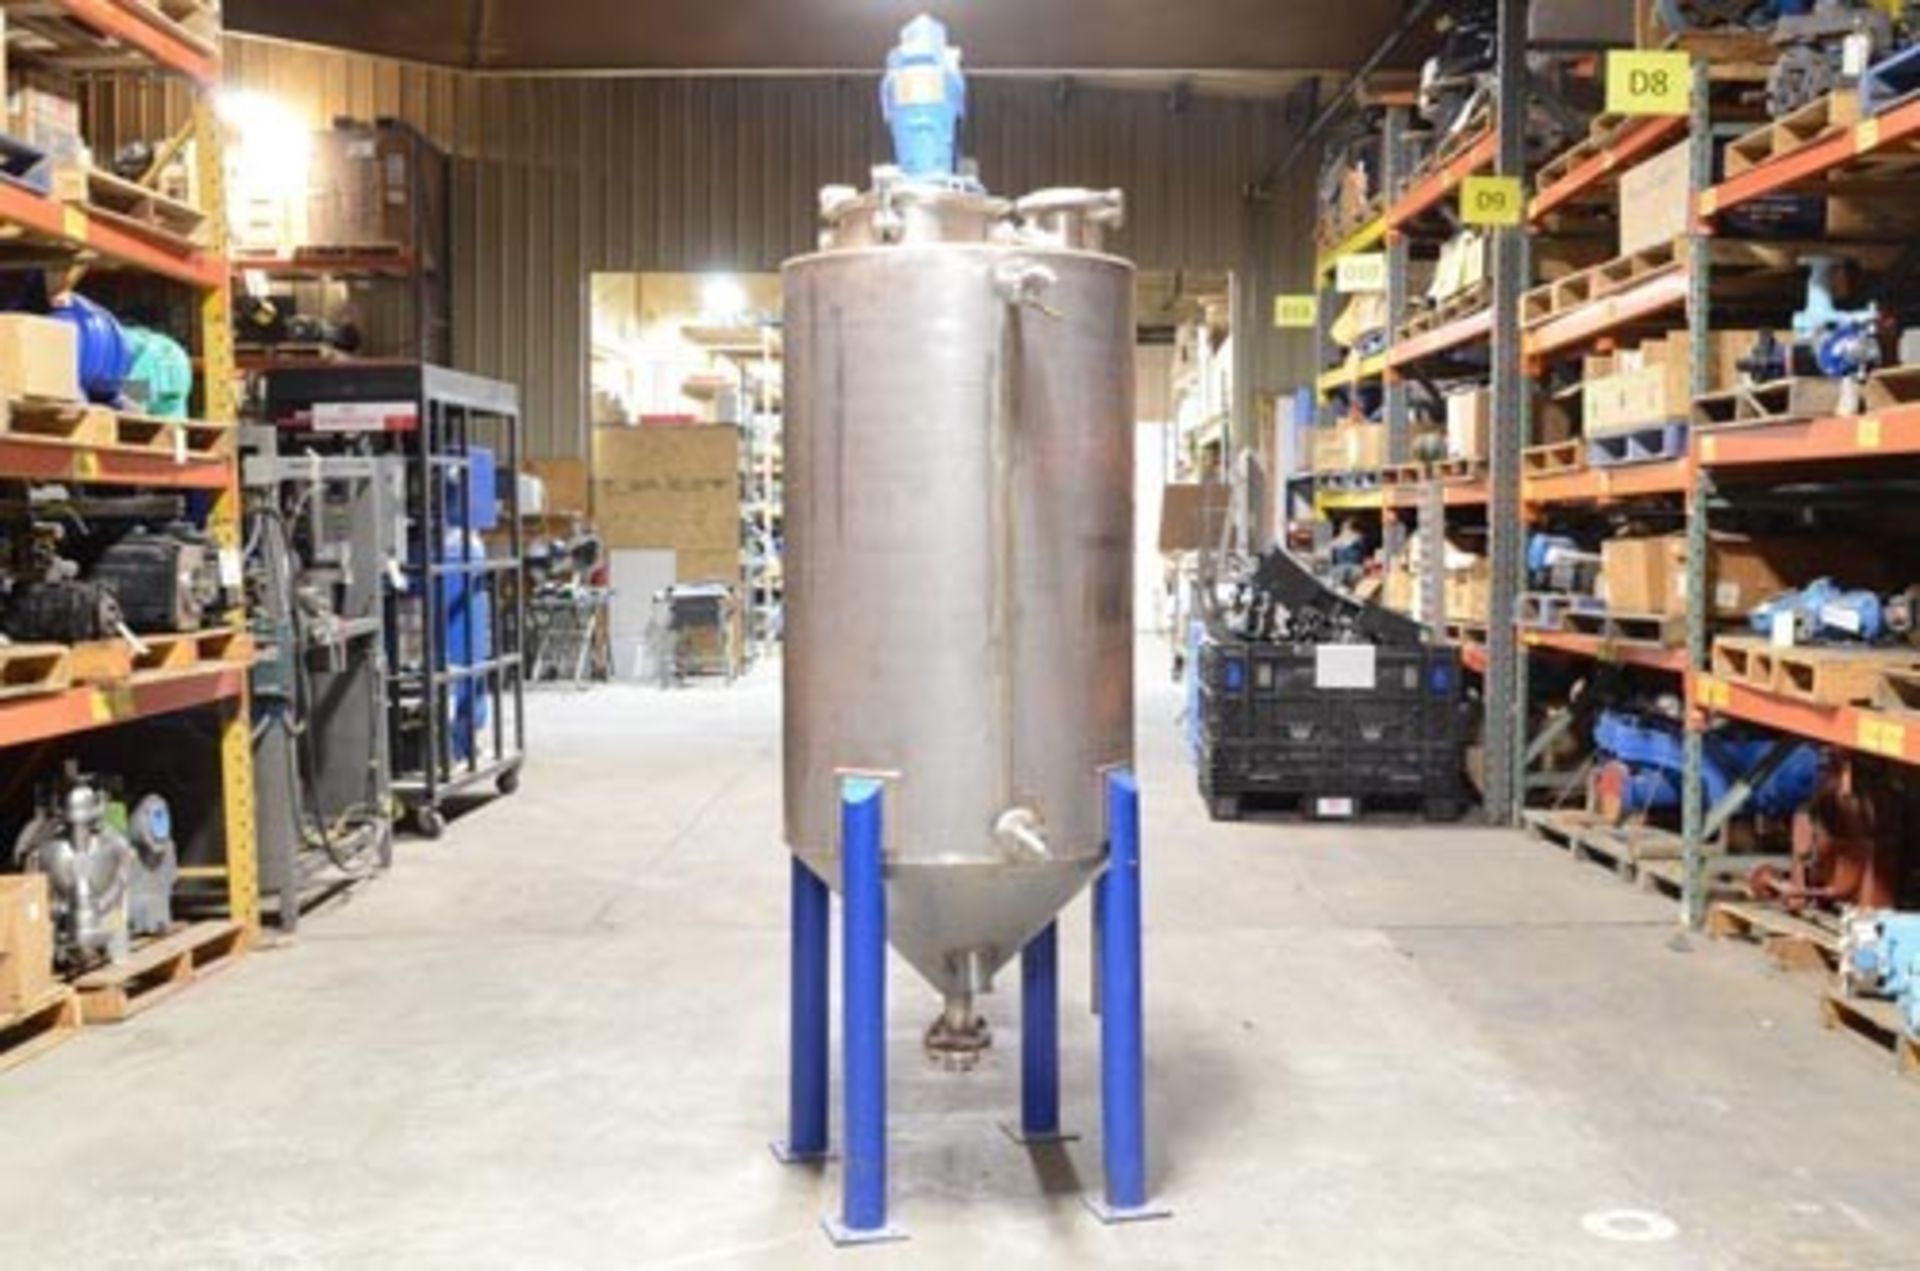 Nettco NSGF-050 Mixer with Large Stainless Steel Tank (Loading Fee $25) (Located Lebanon, PA)